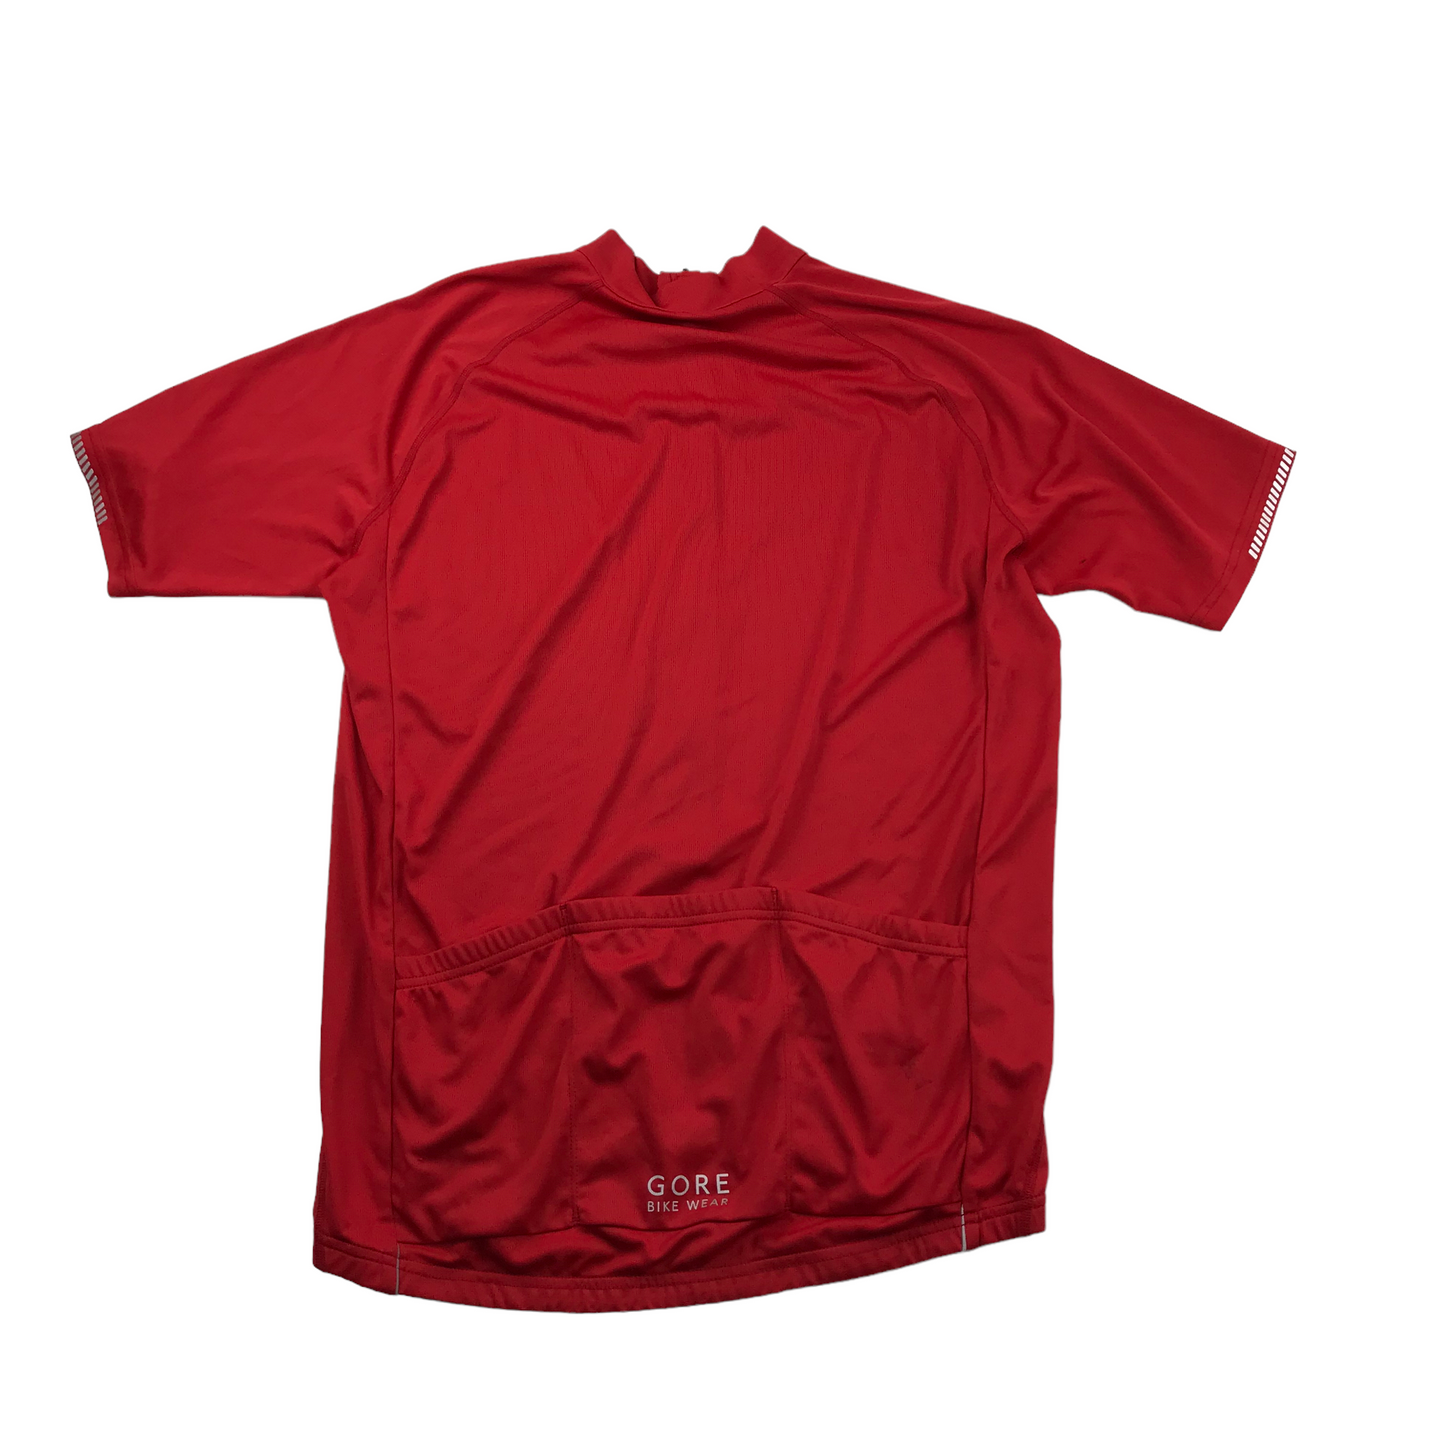 Gore Red Short Sleeve Cycling Sports Top Men's Size XXL